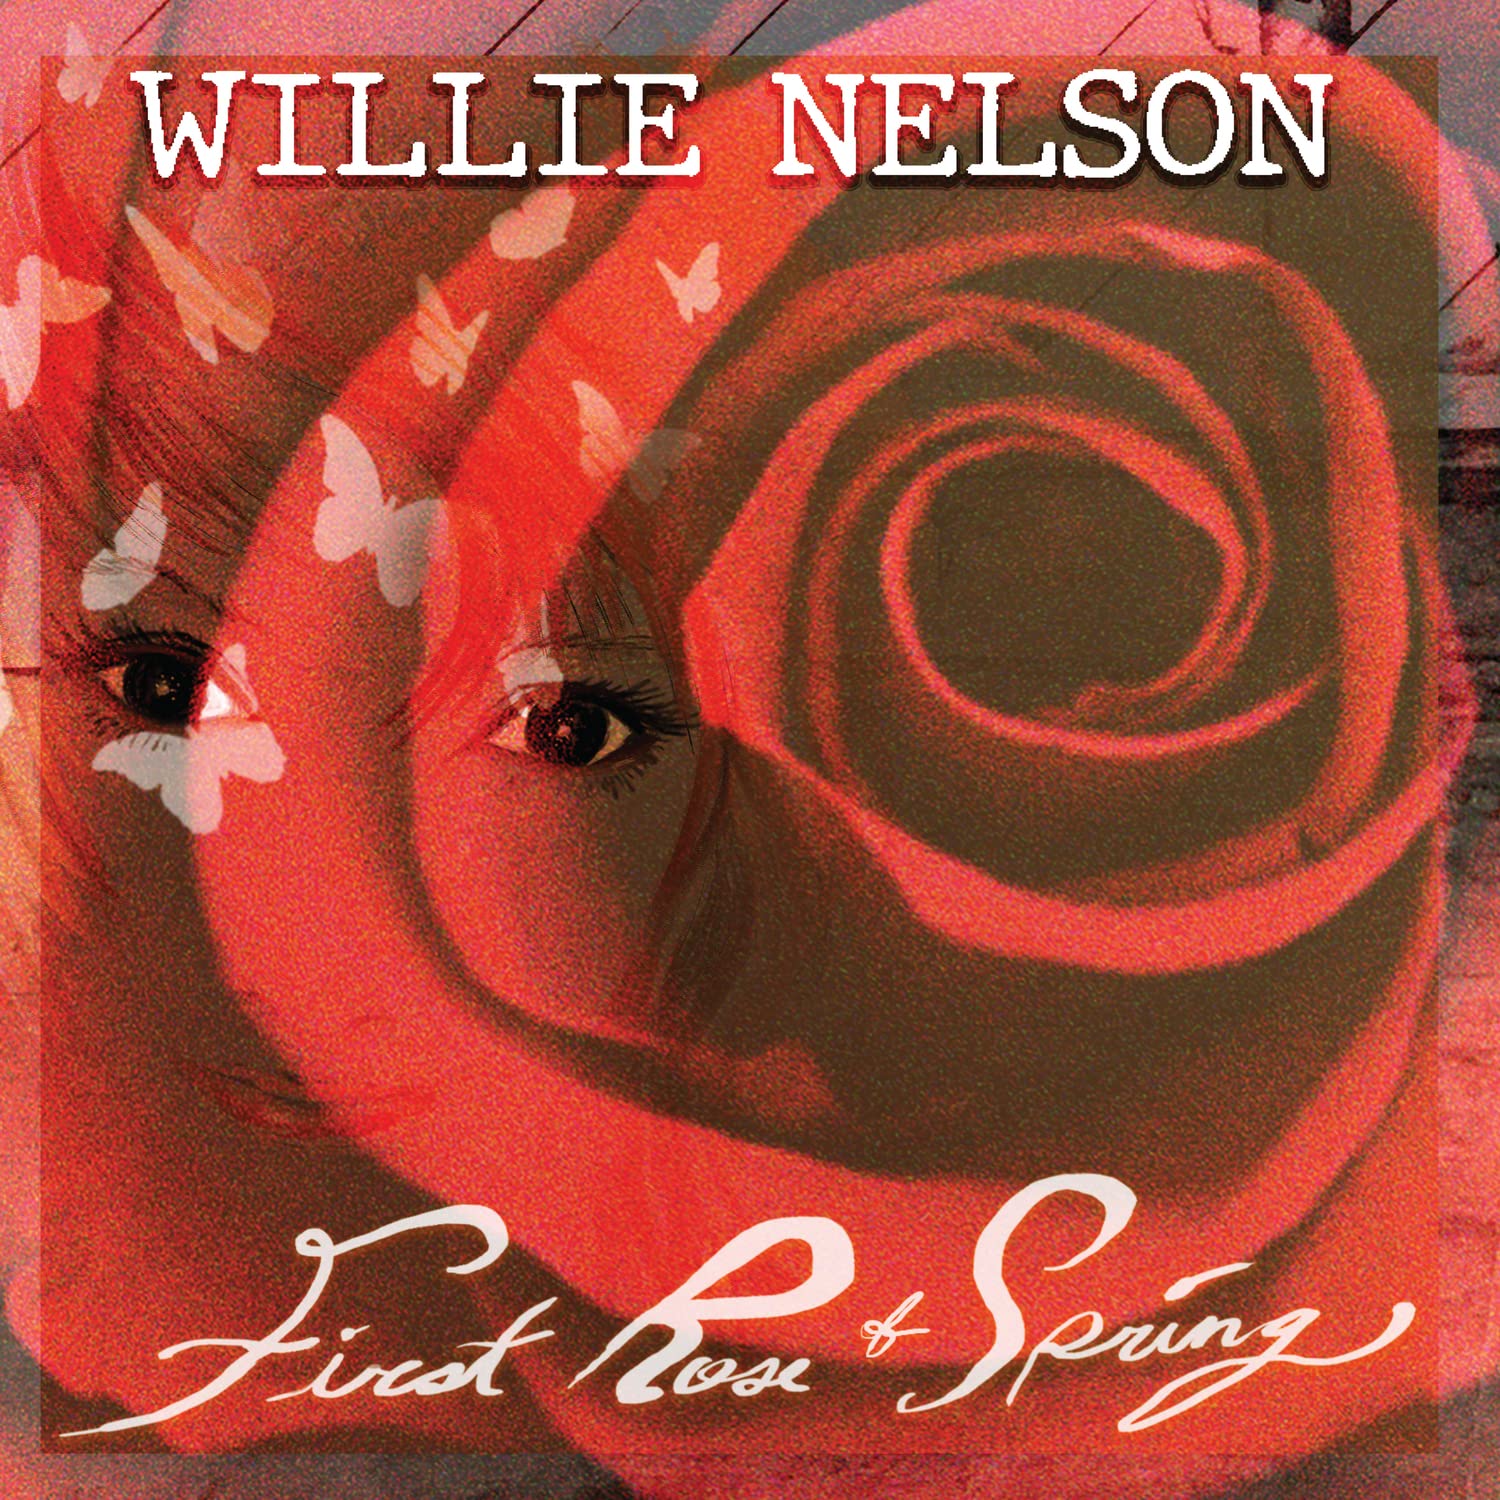 Willie Nelson – First Rose Of Spring